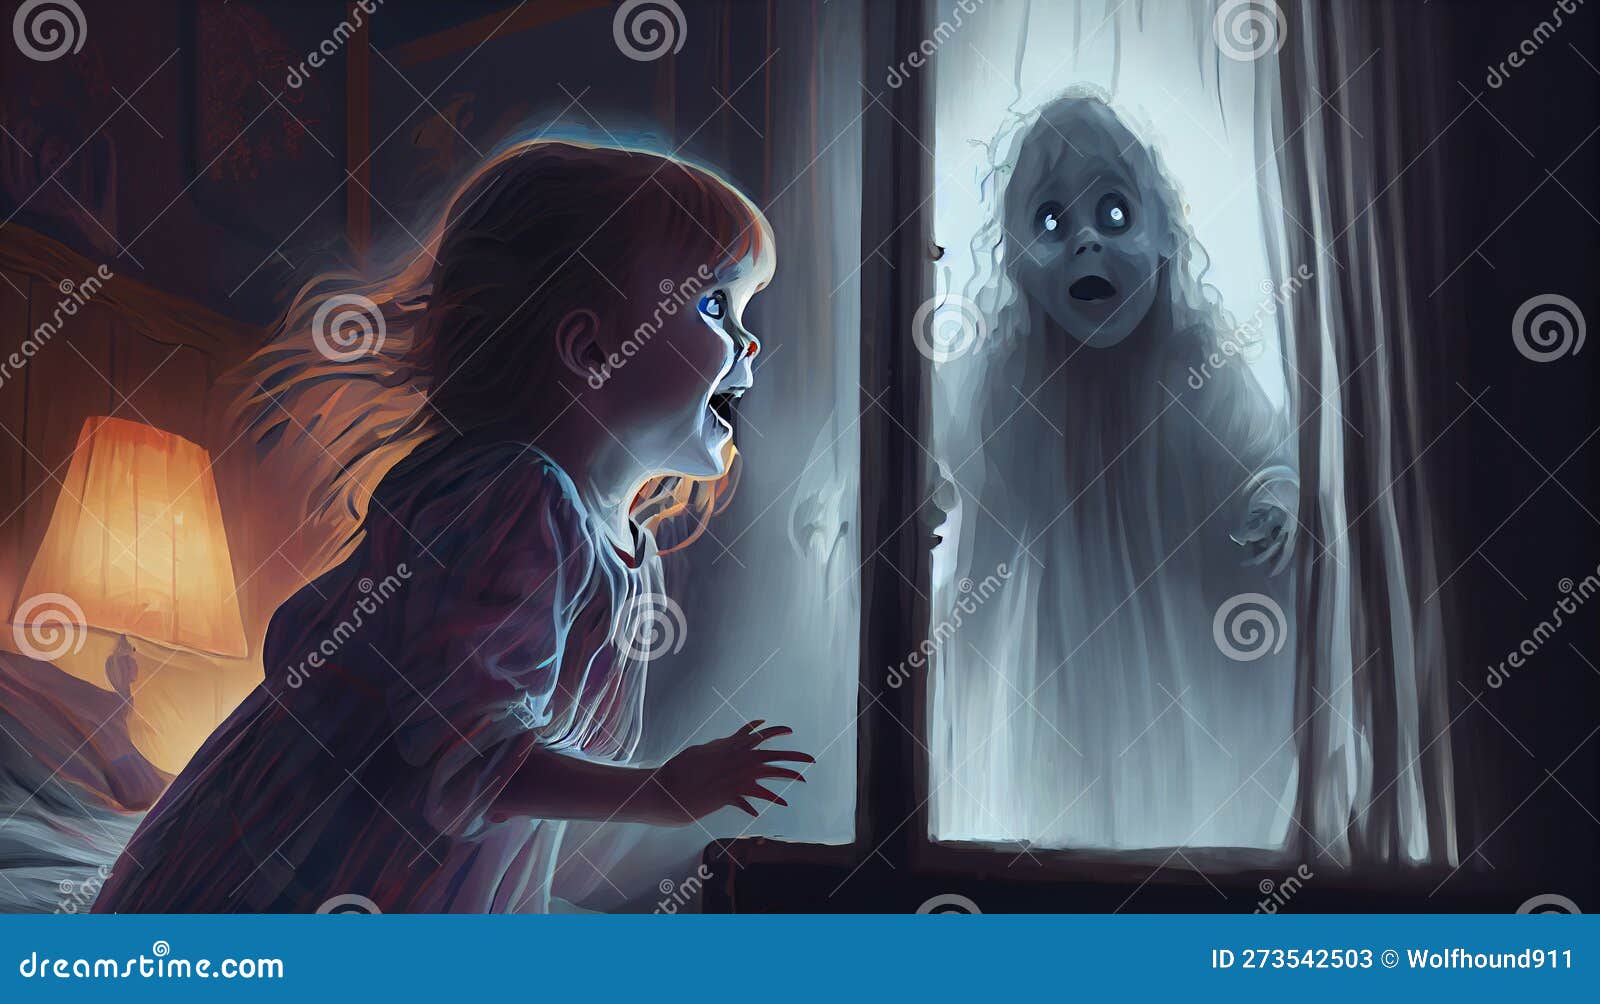 The Child Scaring To See the Ghost, Digital Art Style